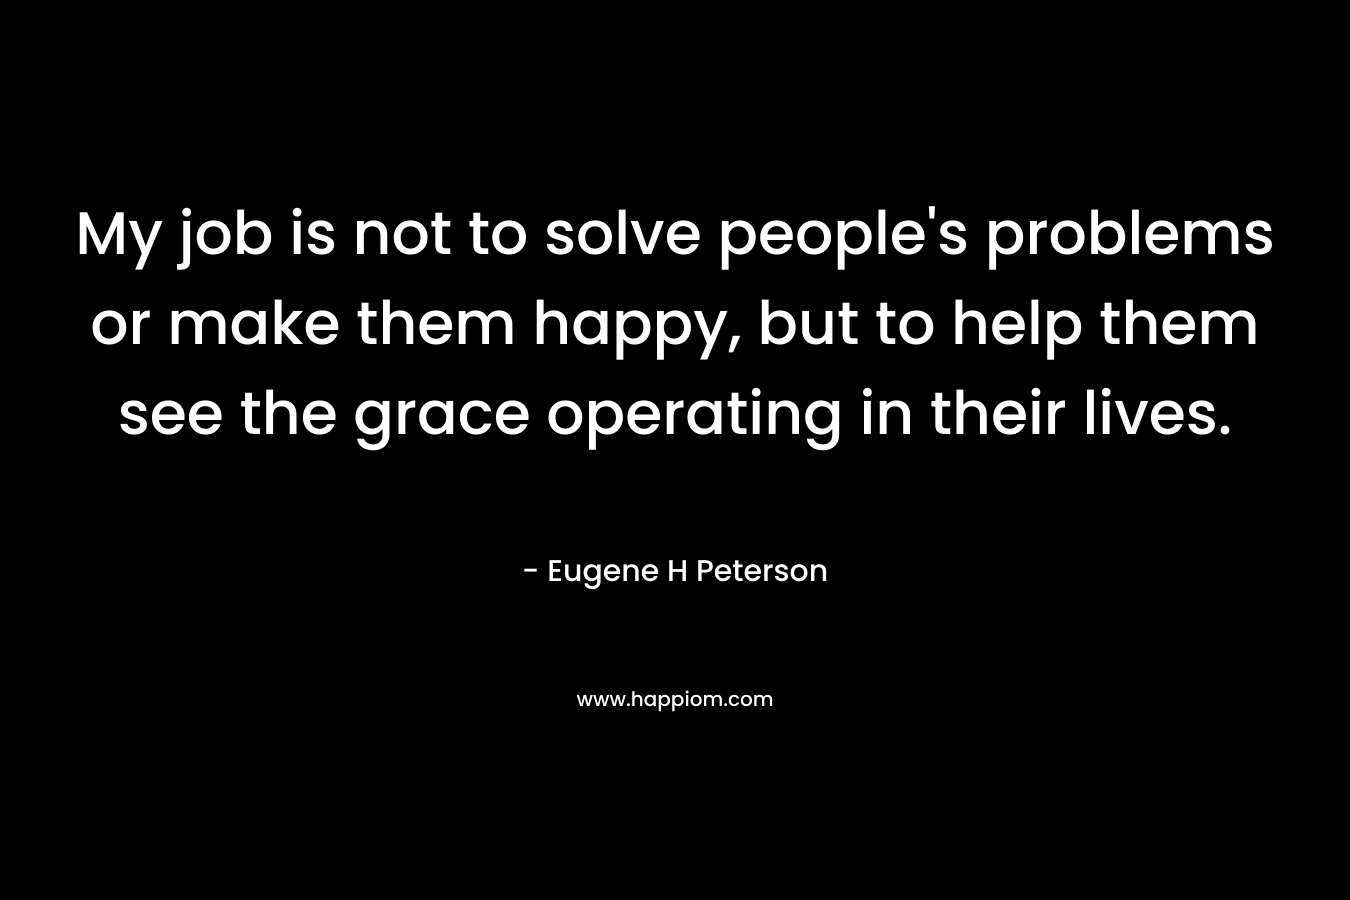 My job is not to solve people’s problems or make them happy, but to help them see the grace operating in their lives. – Eugene H Peterson